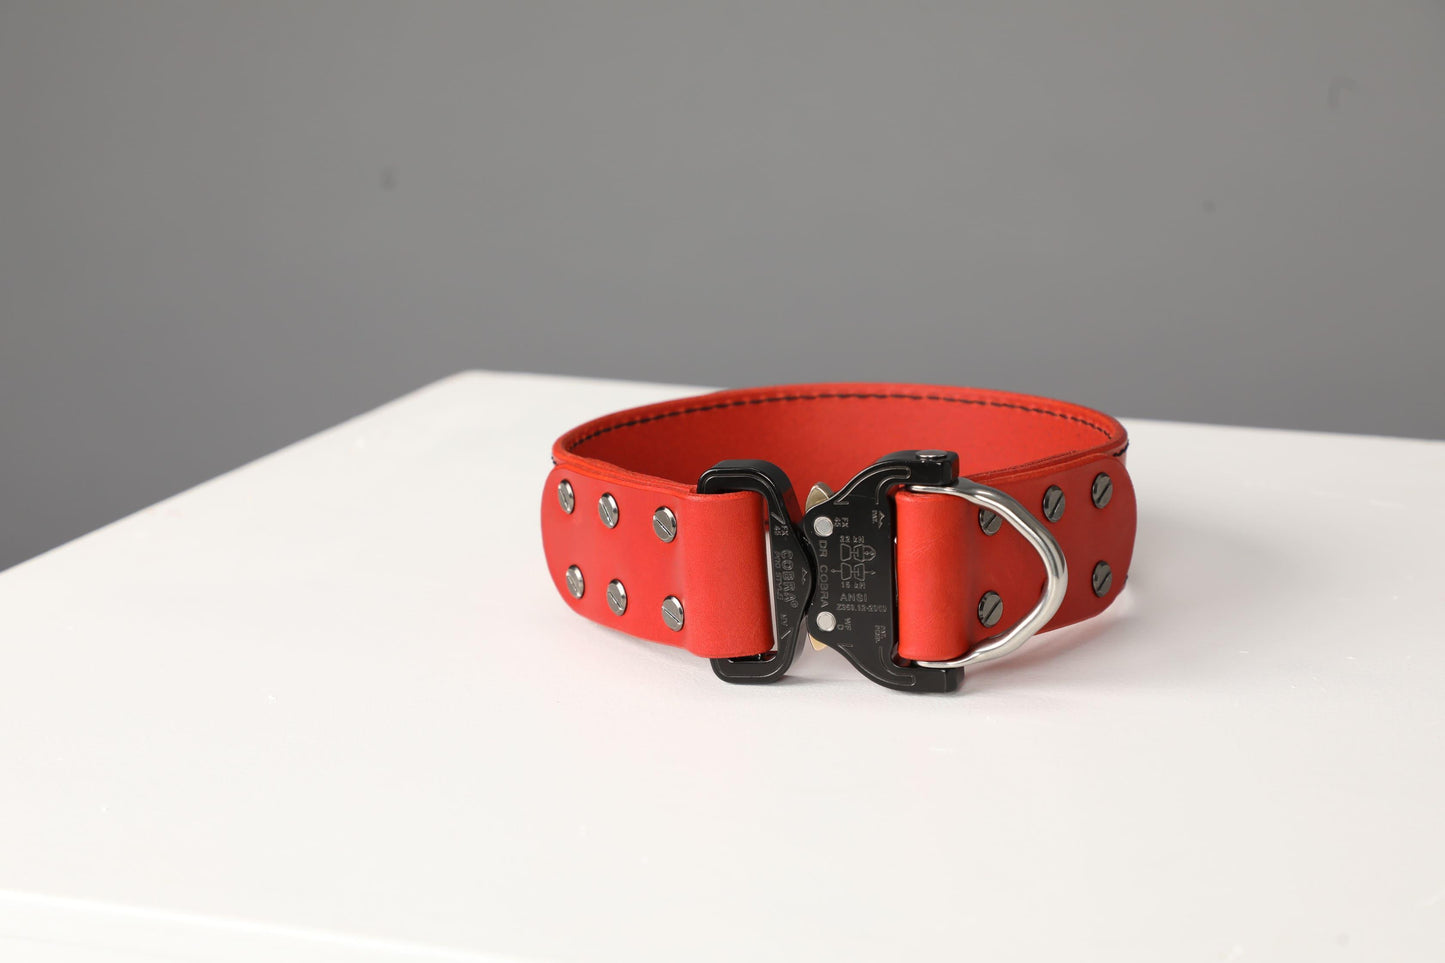 Red leather dog collar with COBRA® buckle - premium dog goods handmade in Europe by animalistus